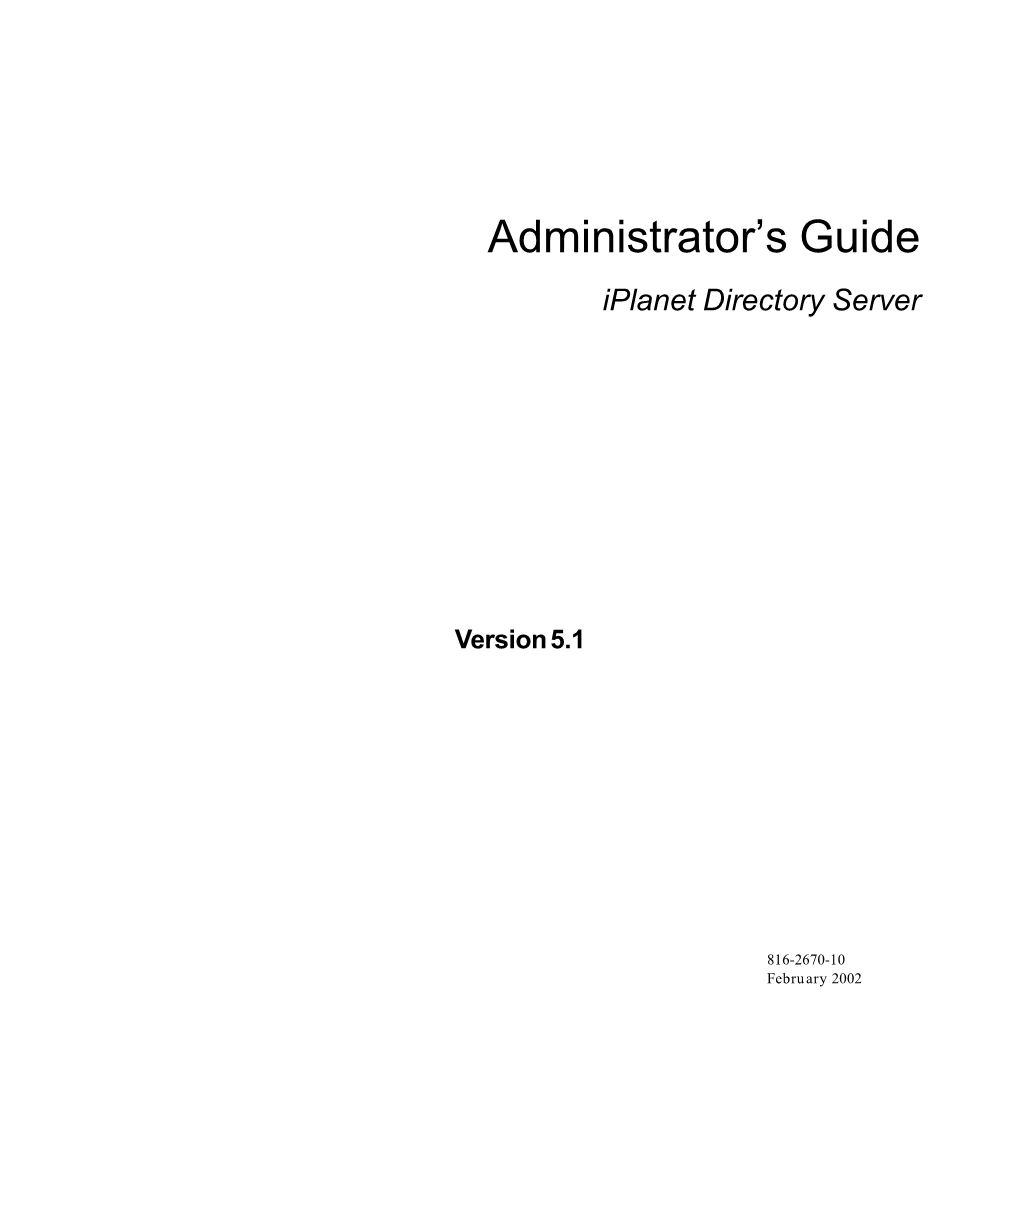 Iplanet Directory Server 5.1 Administrator's Guide